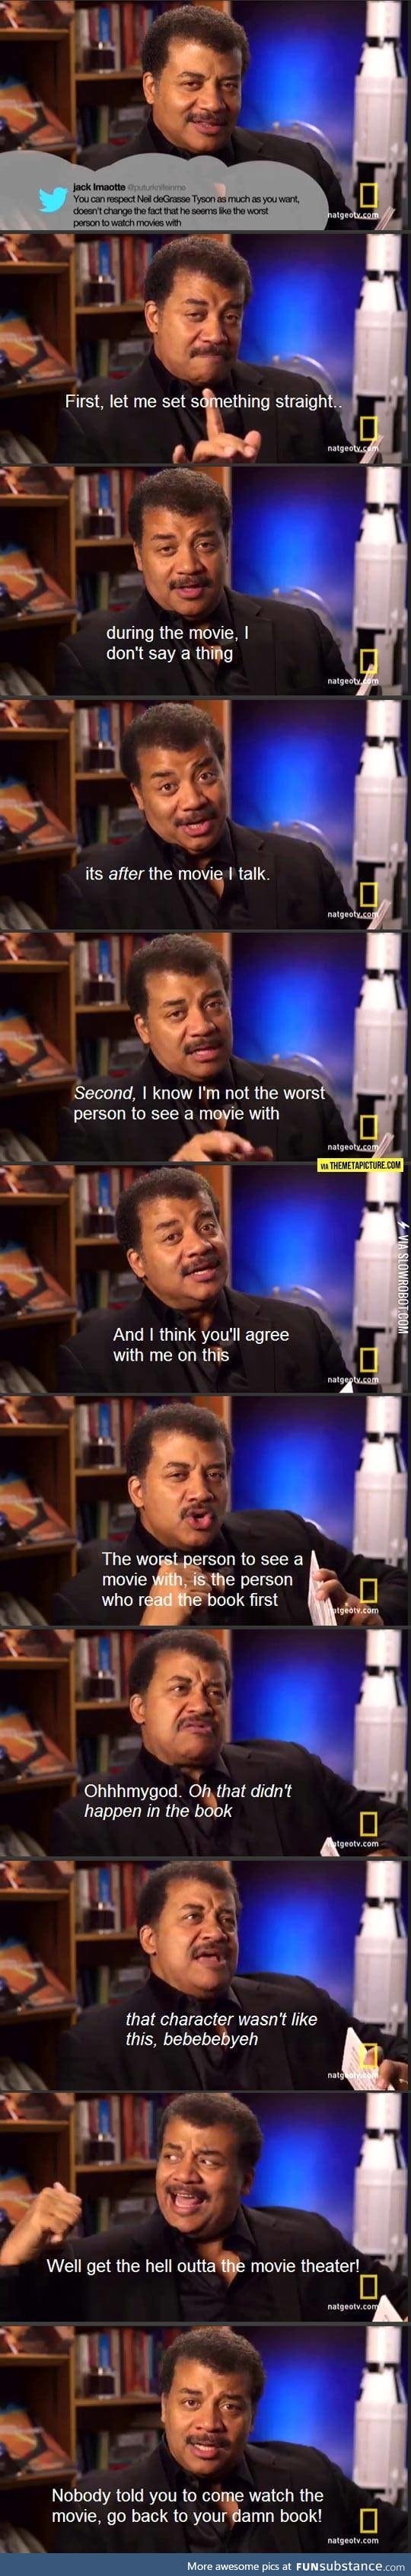 I'd love to see a film with Dr. Tyson